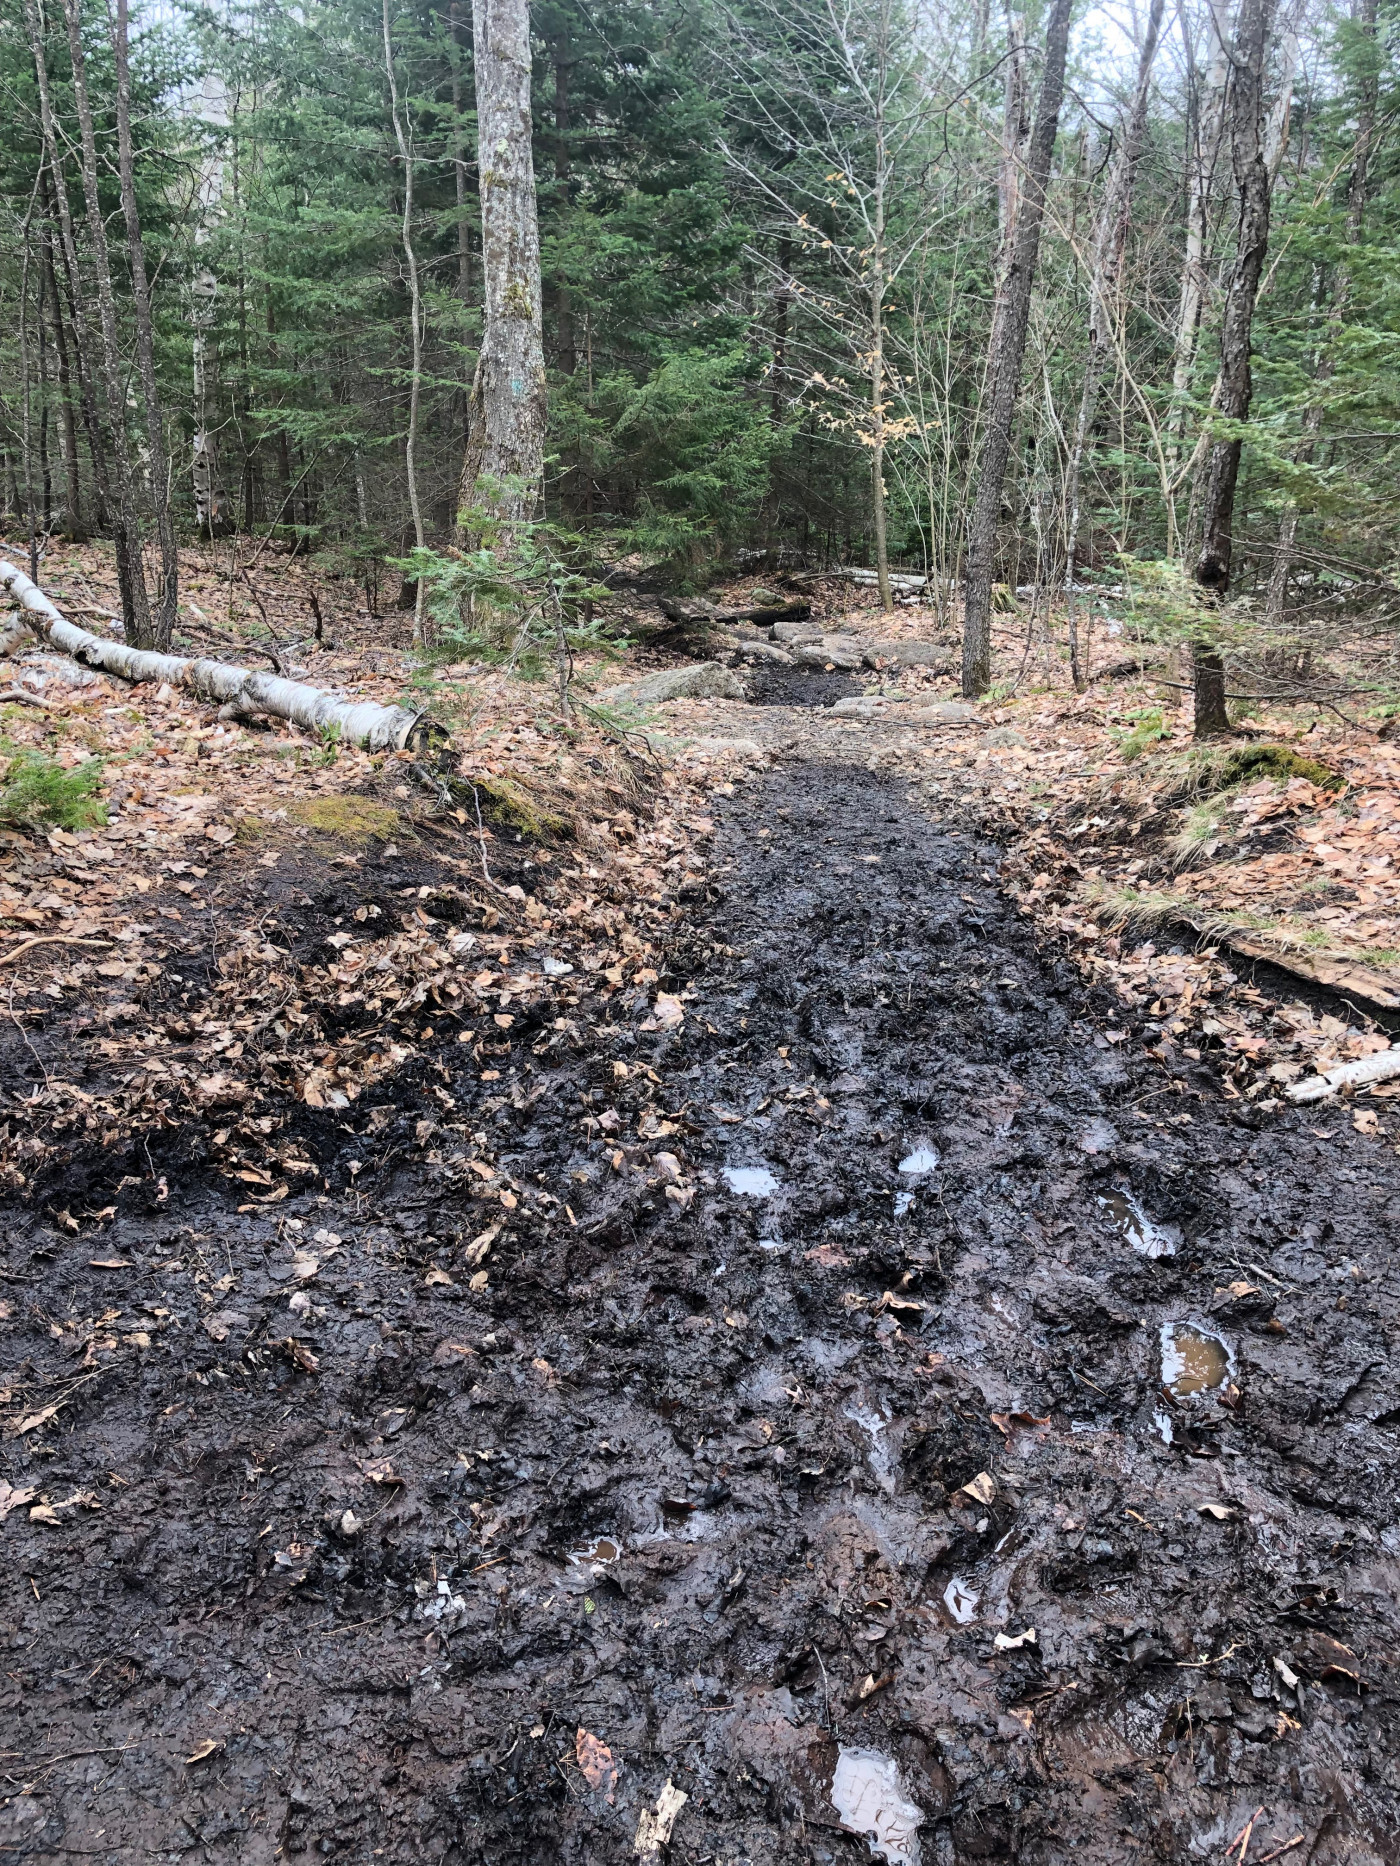 This is a good example of trail widening from hikers walking around the mud. The left side vegetation has already been damaged from hikers walking on the trail bank.